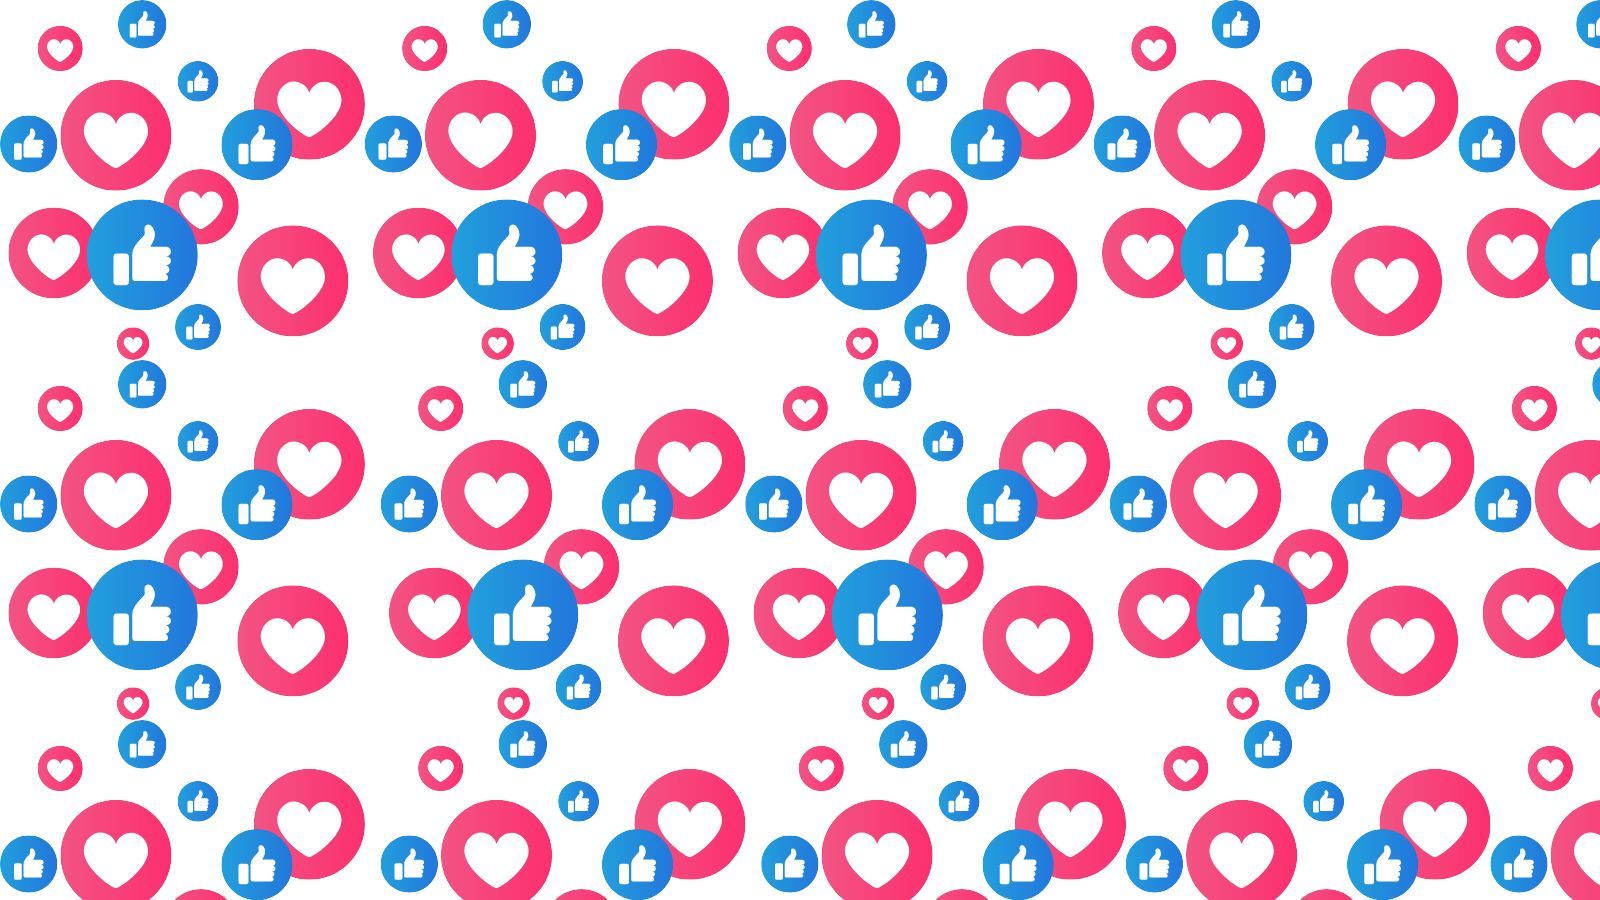 a pattern of pink and blue thumbs up and hearts on a white background .